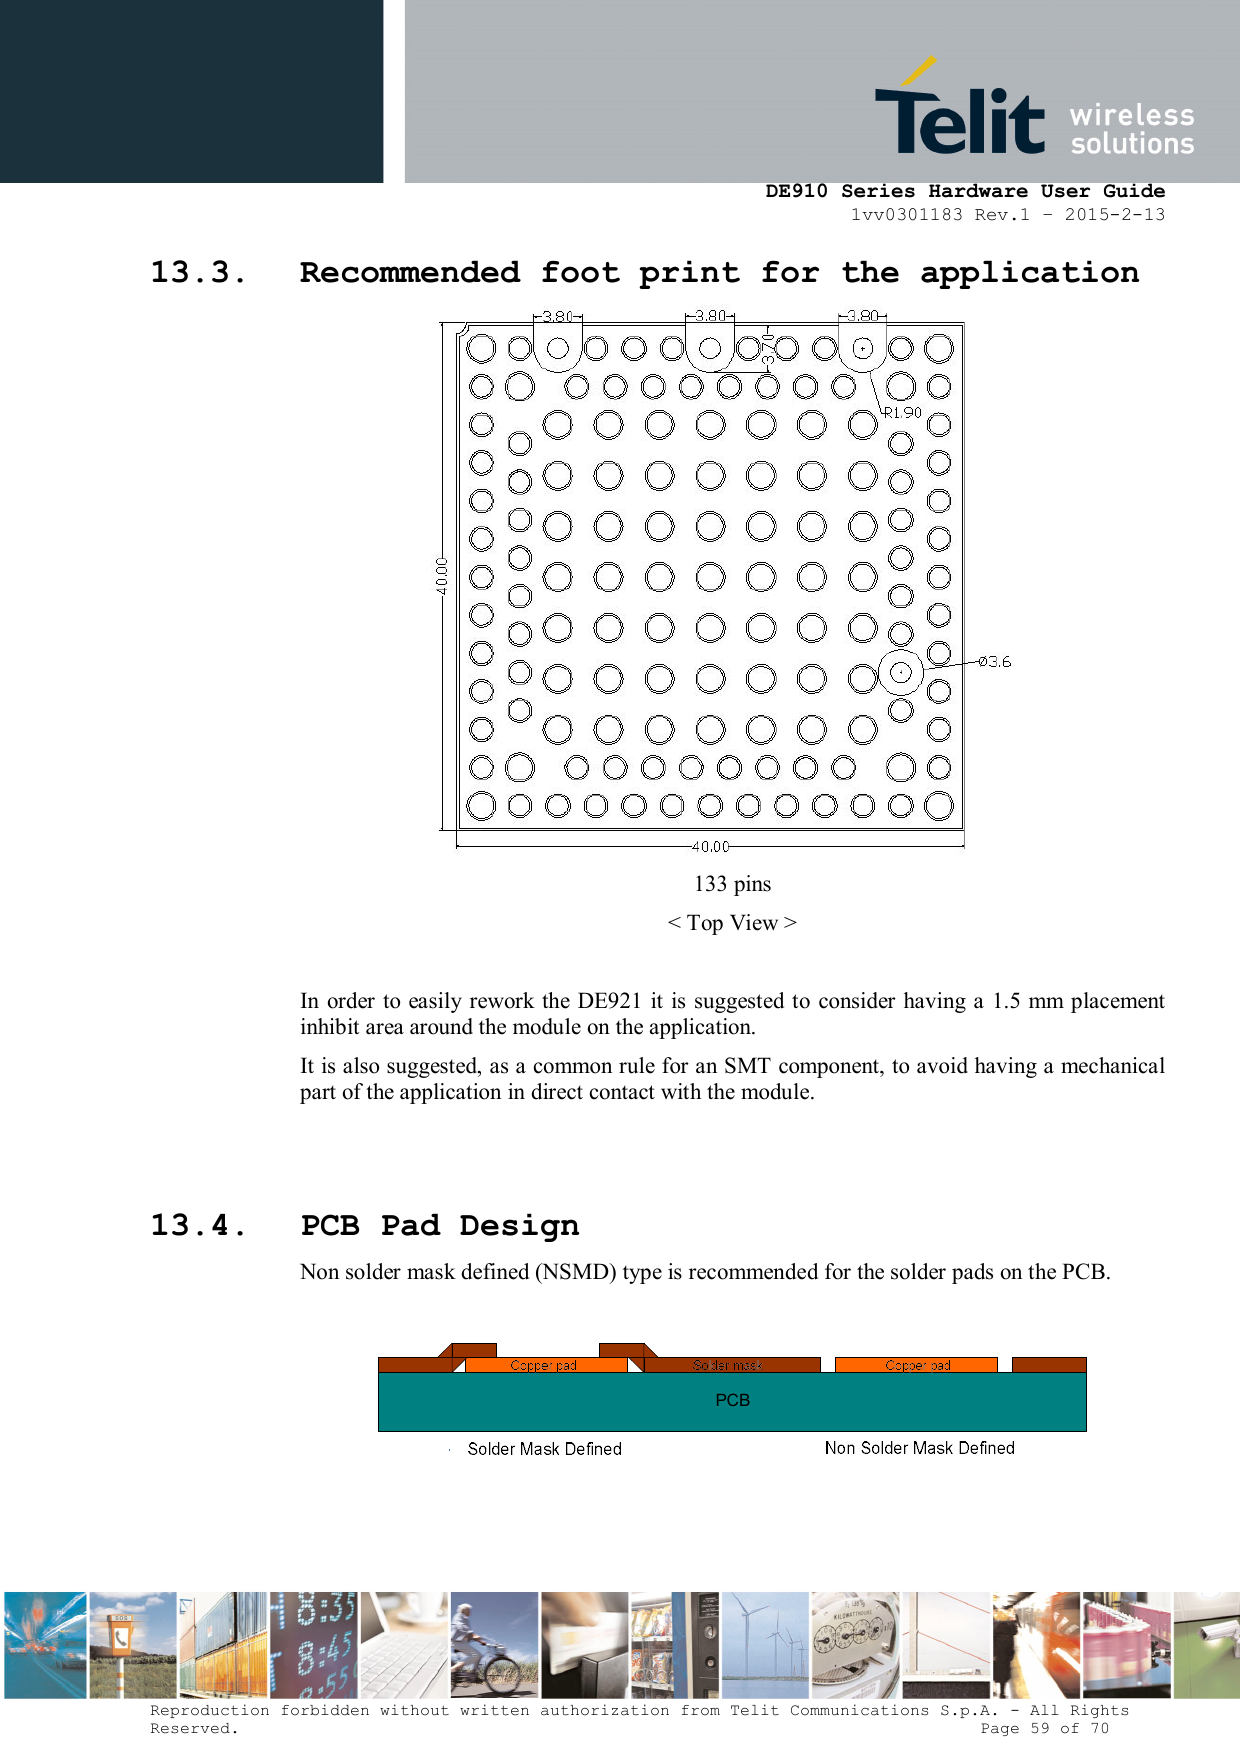      DE910 Series Hardware User Guide 1vv0301183 Rev.1 – 2015-2-13 Reproduction forbidden without written authorization from Telit Communications S.p.A. - All Rights Reserved.                                                                          Page 59 of 70 13.3. Recommended foot print for the application  133 pins &lt; Top View &gt;  In  order to easily rework the DE921 it is suggested to consider having a 1.5 mm placement inhibit area around the module on the application.  It is also suggested, as a common rule for an SMT component, to avoid having a mechanical part of the application in direct contact with the module.   13.4. PCB Pad Design Non solder mask defined (NSMD) type is recommended for the solder pads on the PCB.  PCB  